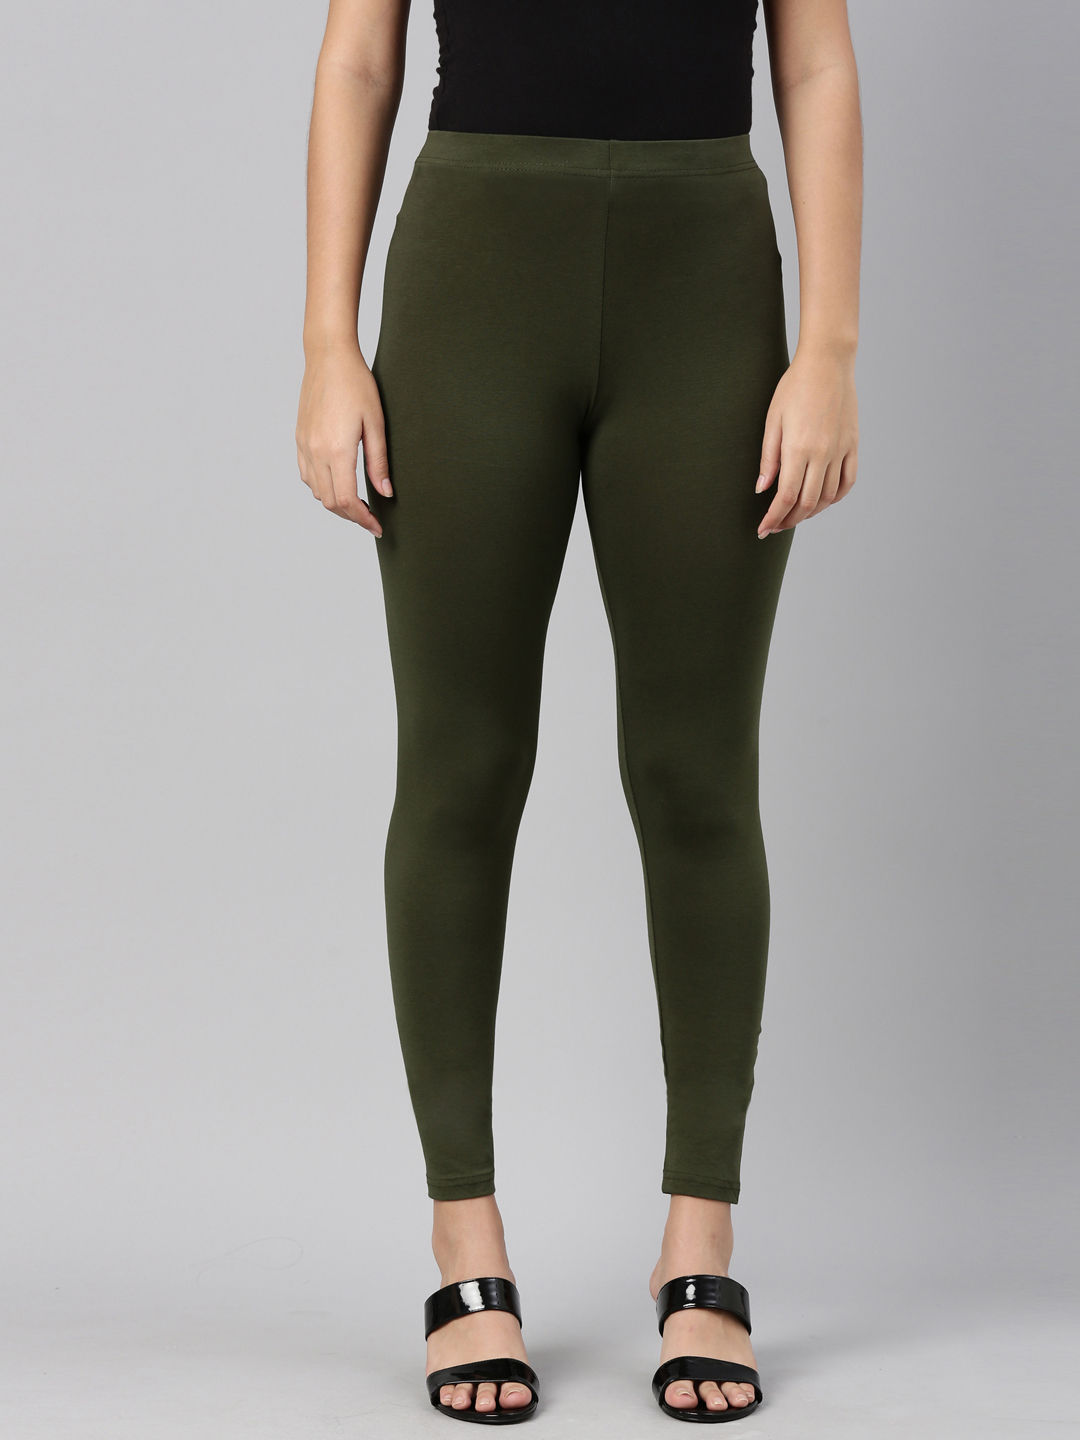 Spanx Ponte Ankle-Length Leggings Loden Green 1X A309030 for sale online |  eBay